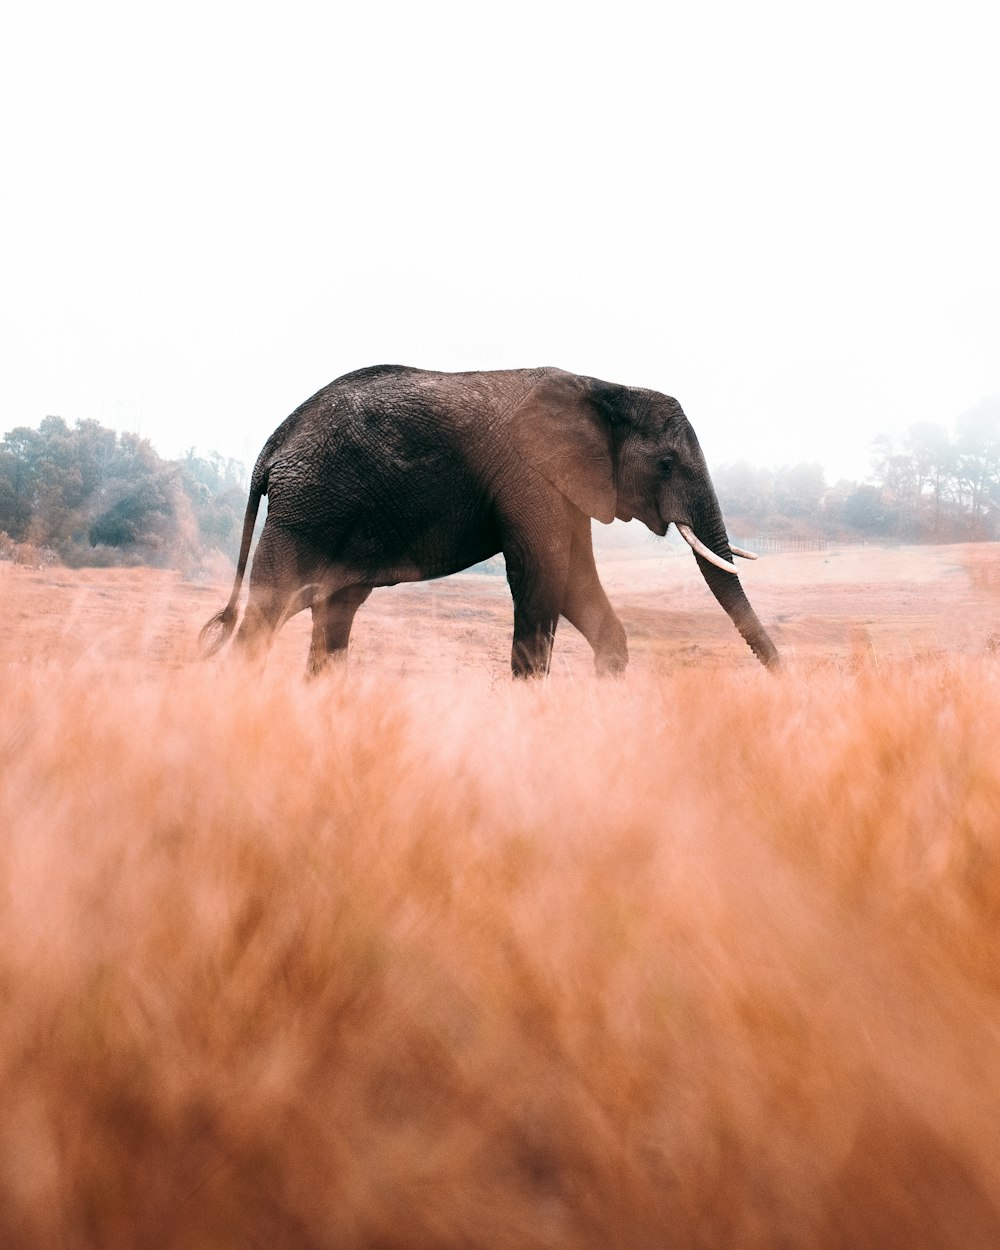 elephant walking on brown grass field during daytime